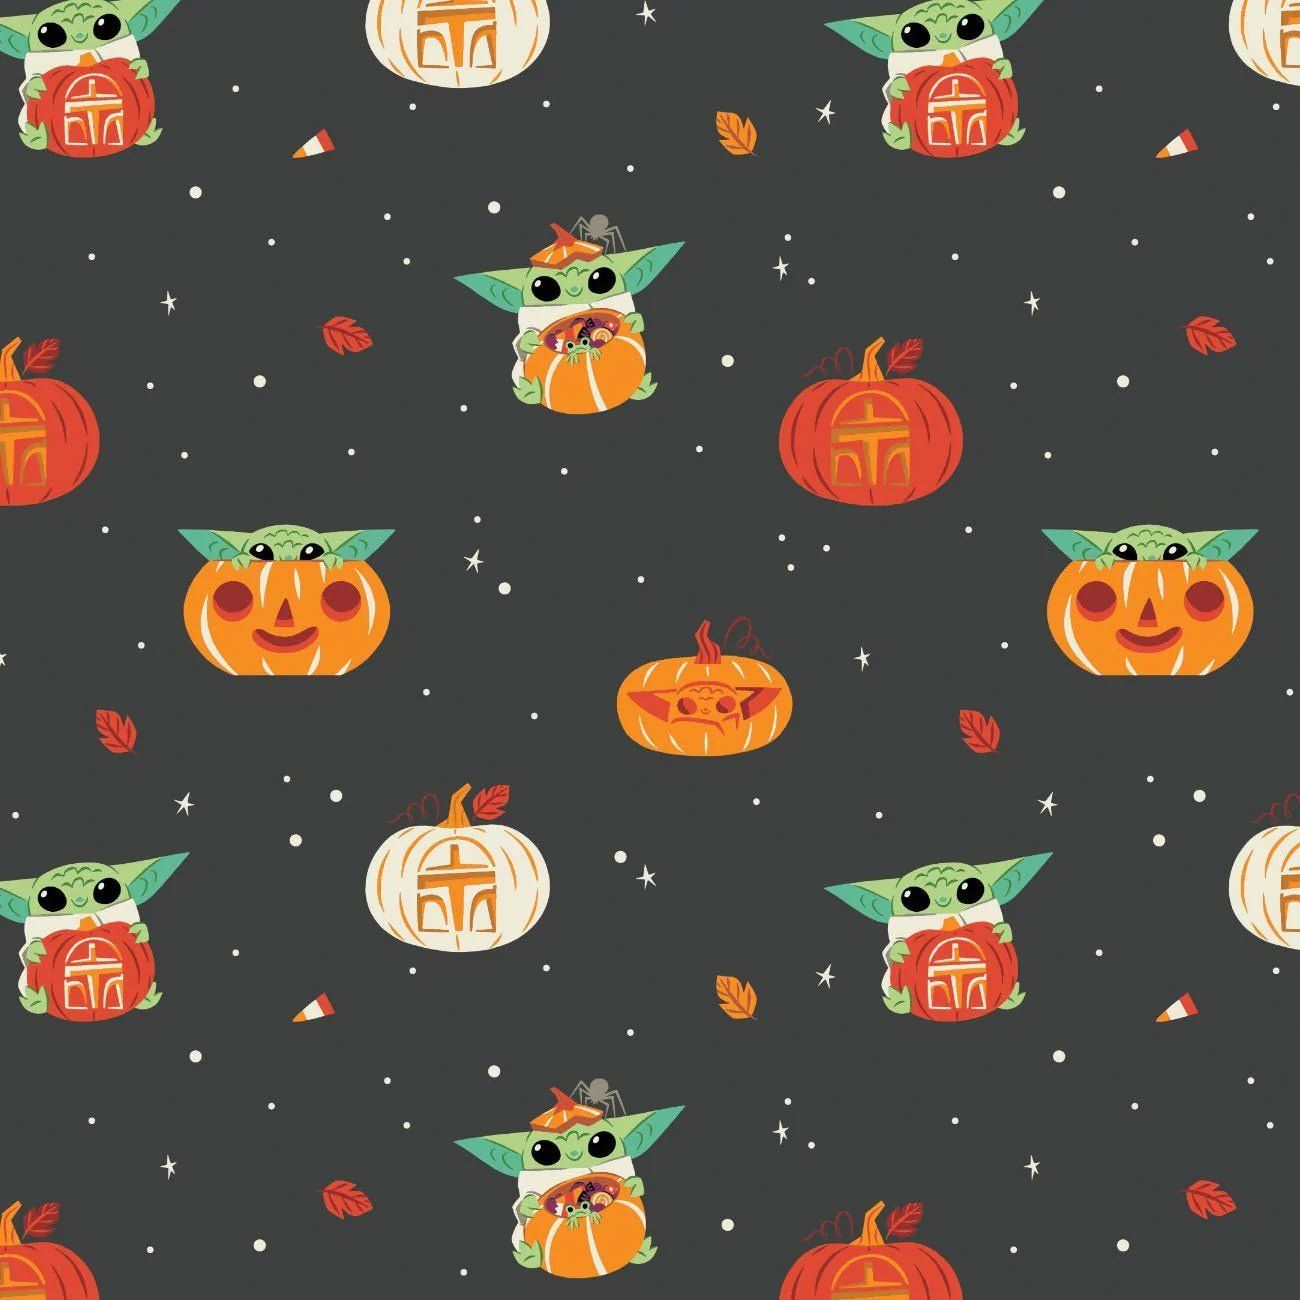 A repeating pattern of Baby Yoda and pumpkins on a dark gray background - Baby Yoda